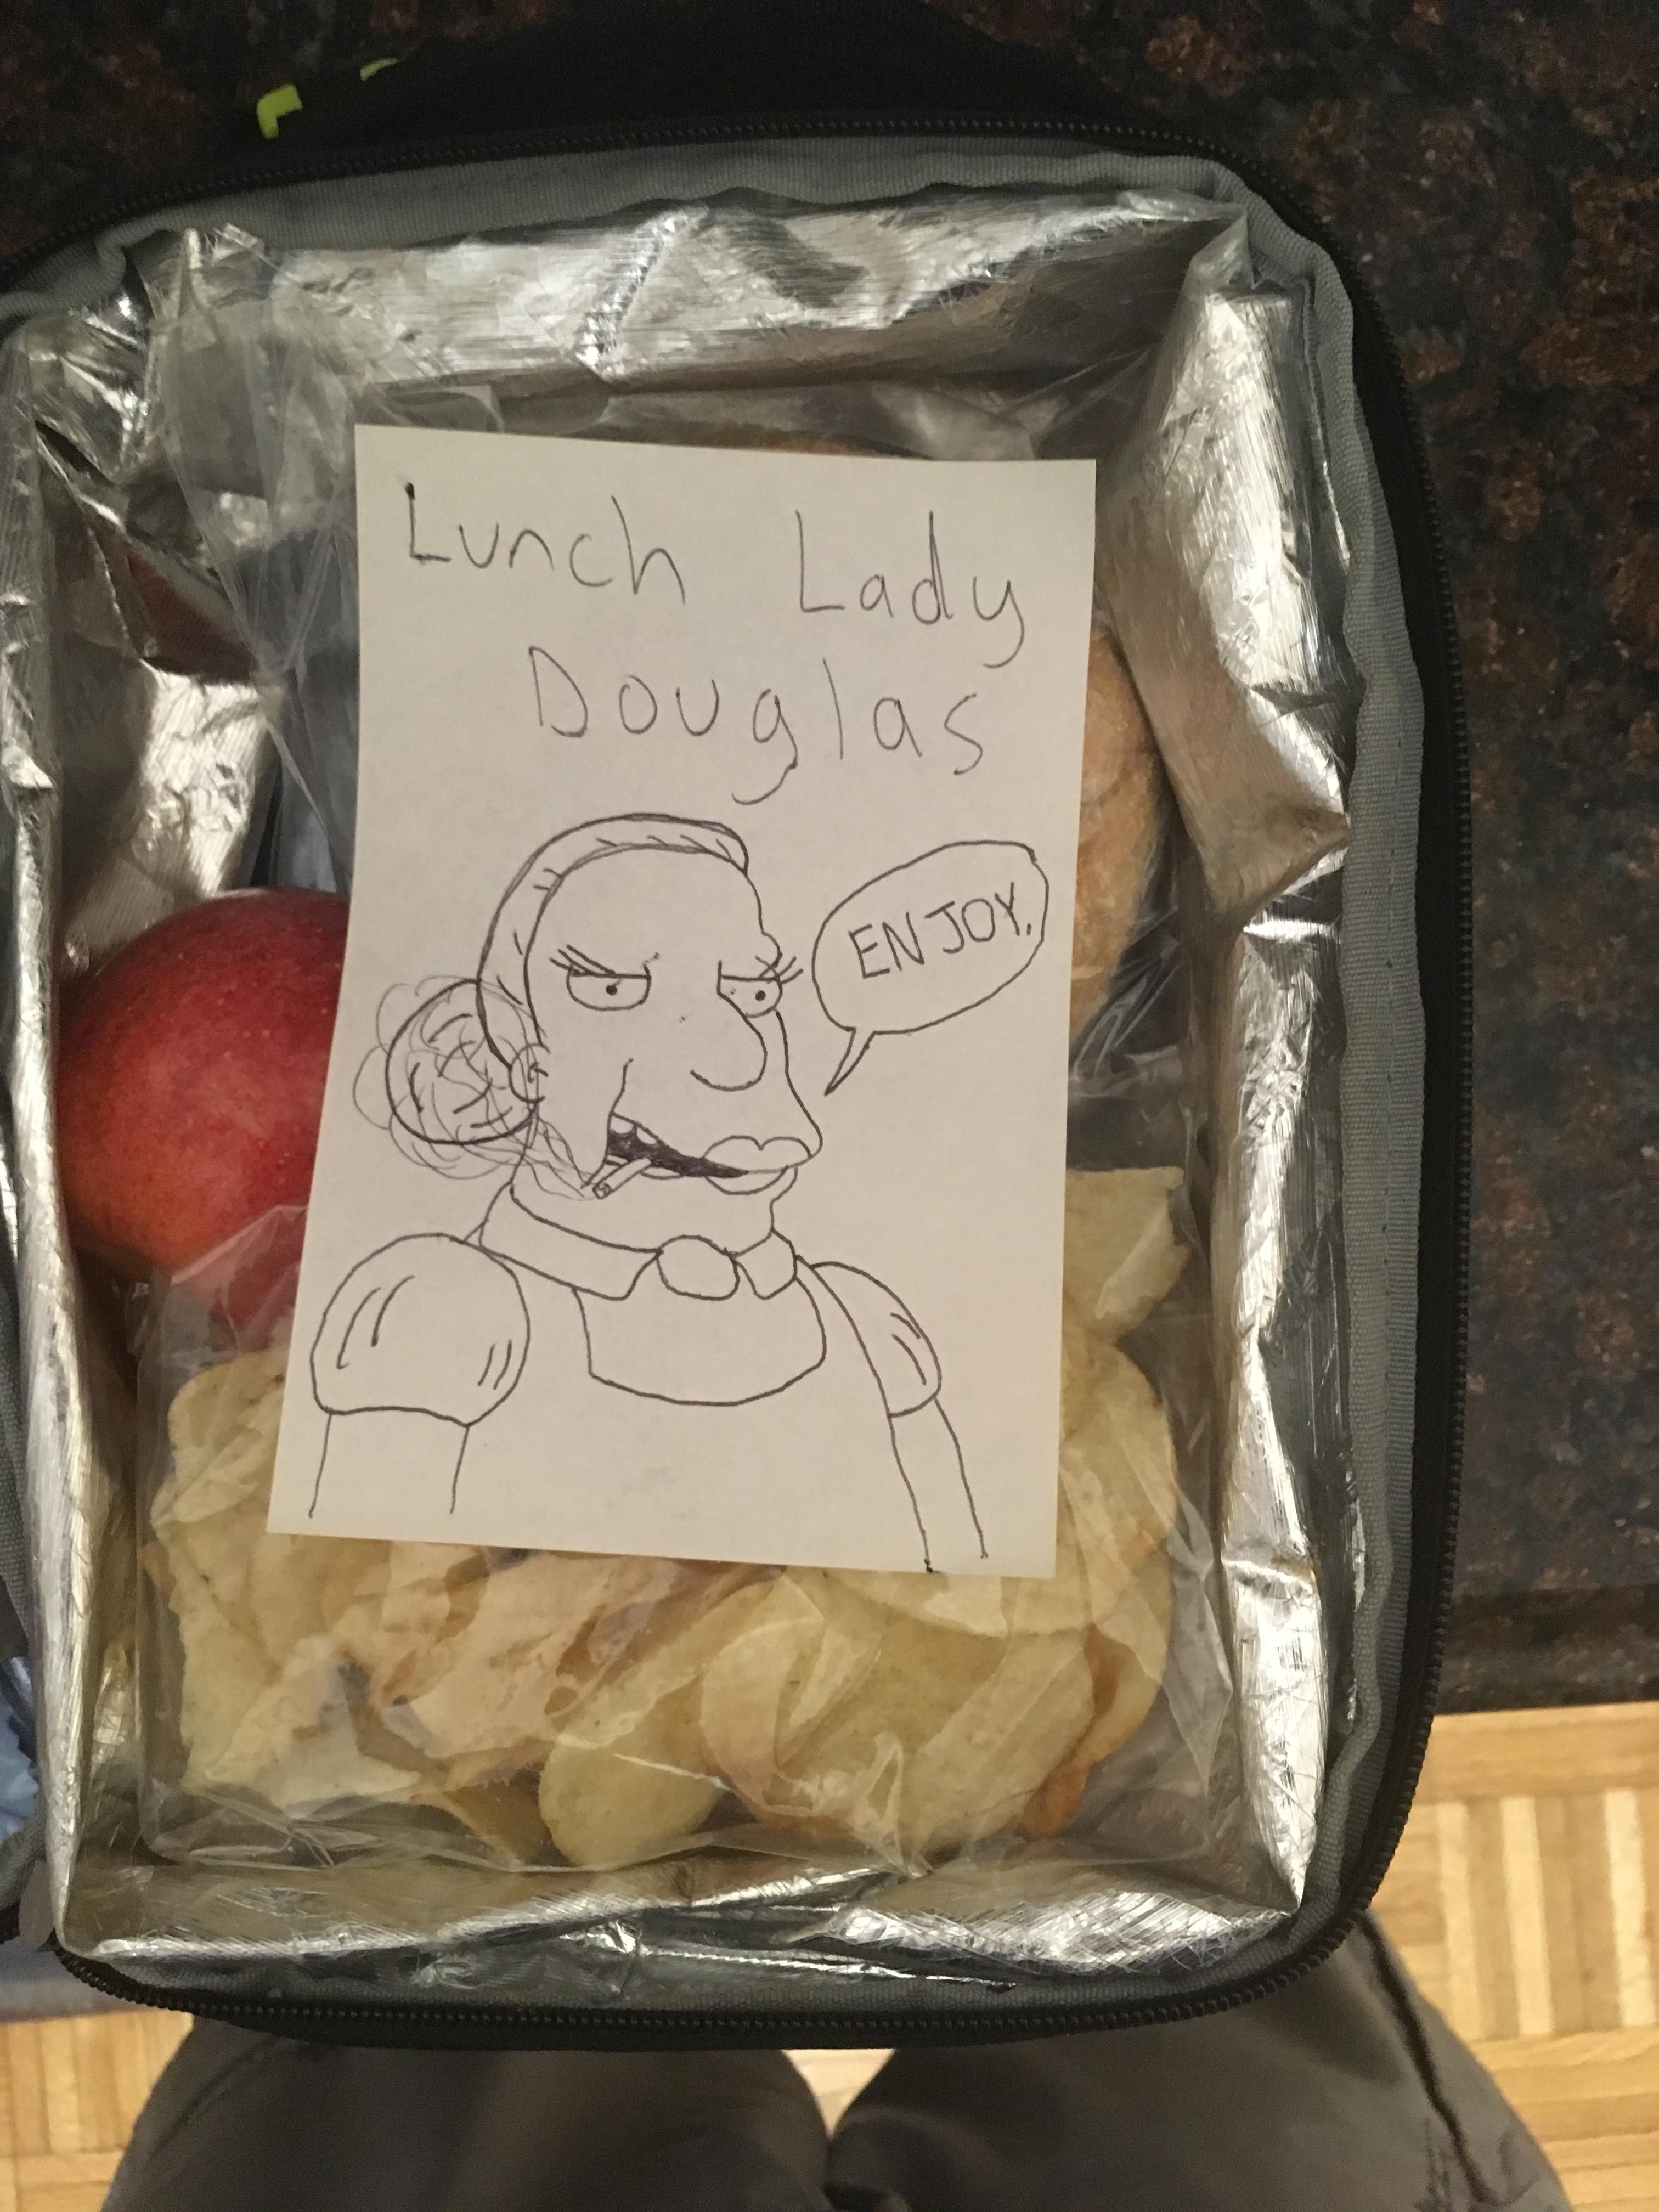 I was exhausted and asked my brother if he could do me a favor and make me my lunch for work. When I opened my lunchbox the next day this is what I saw.